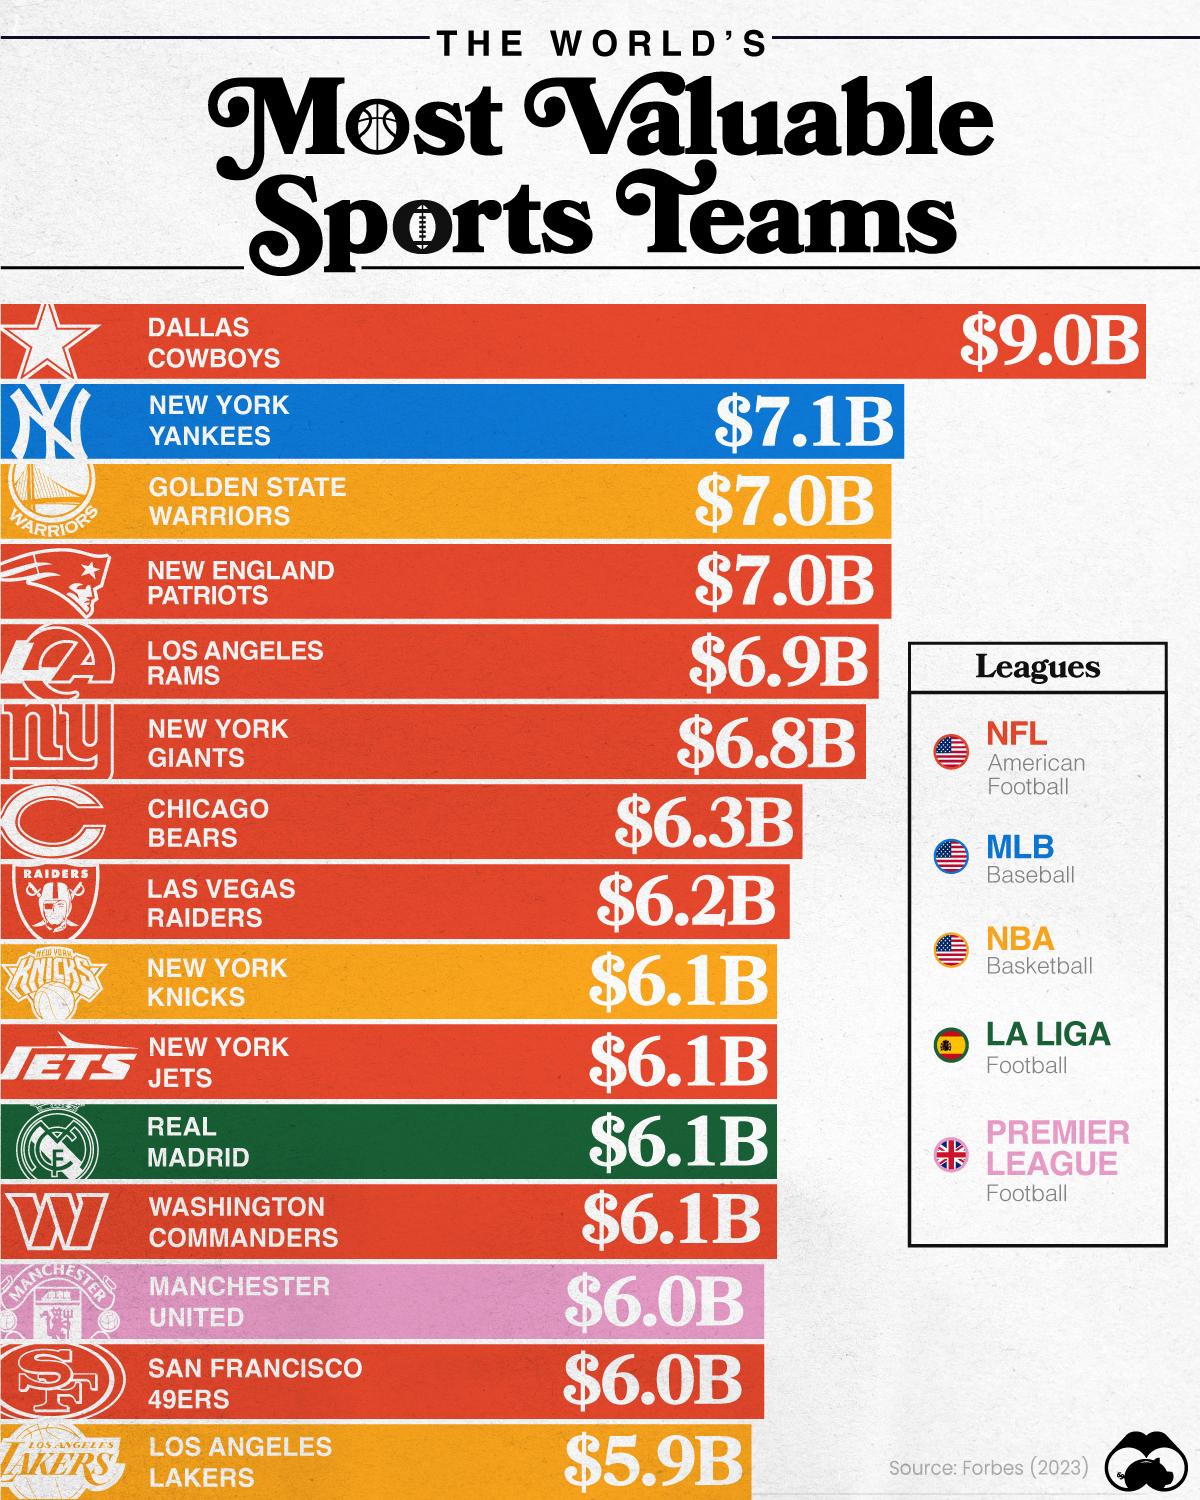 The NFL Dominates the Most Valuable Teams Ranking 🏈